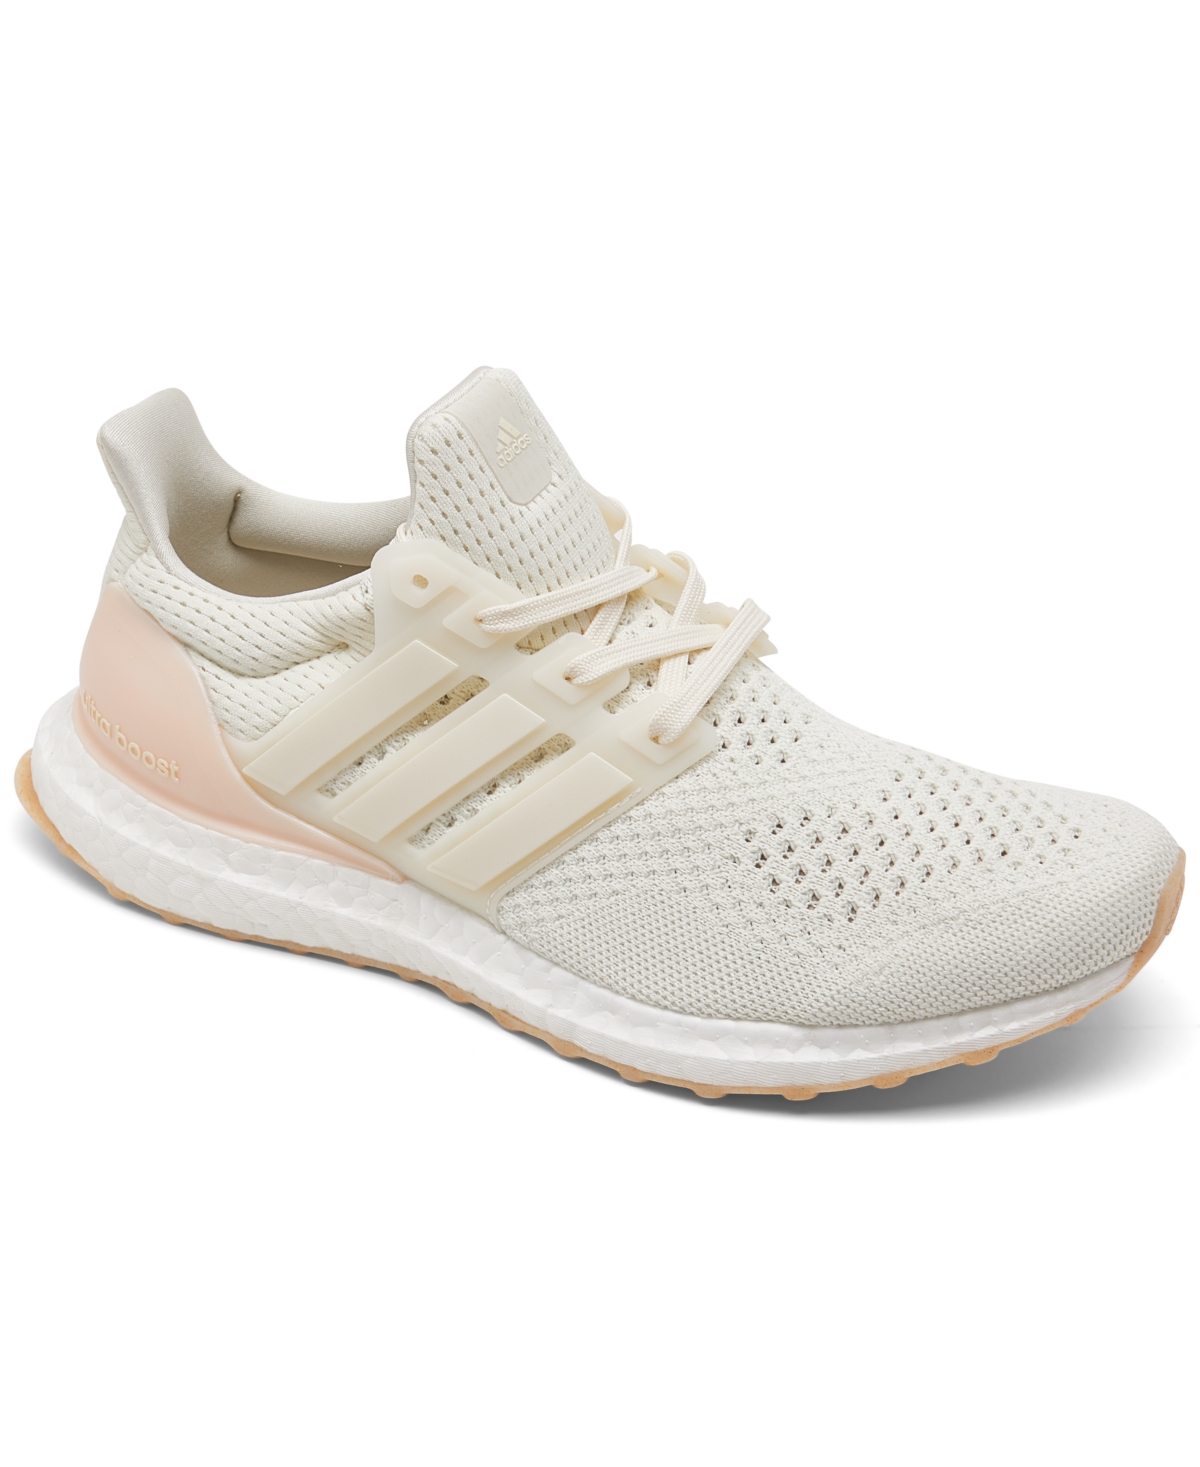 Adidas Originals Women's Ultraboost 1.0 Running Sneakers From Finish Line In Off White,wonde